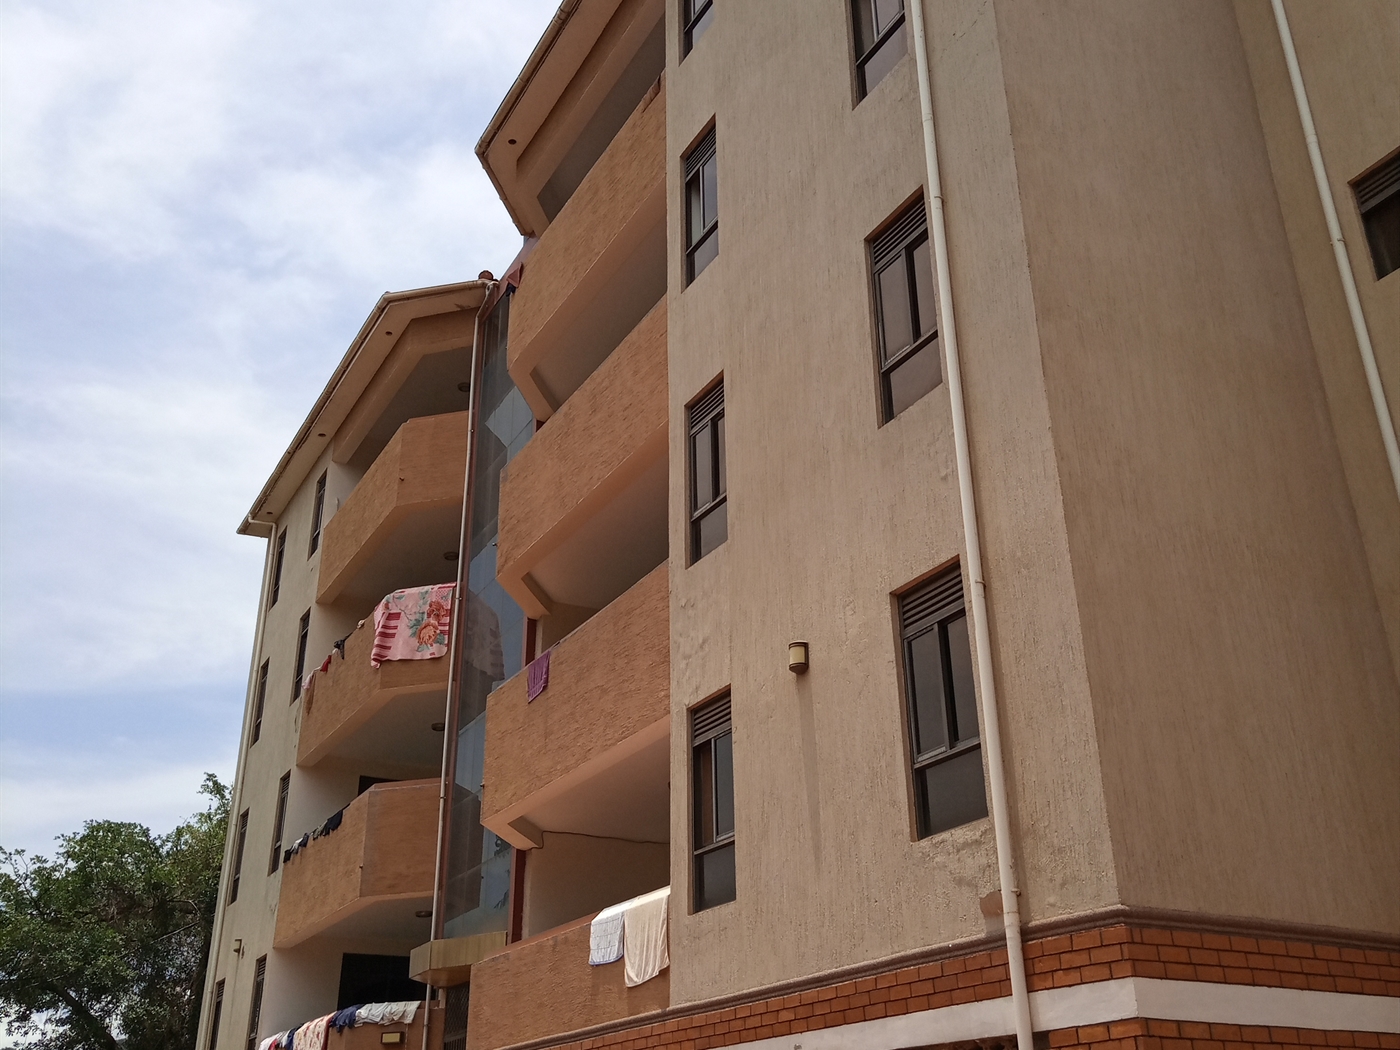 Apartment for rent in Makindye Kampala